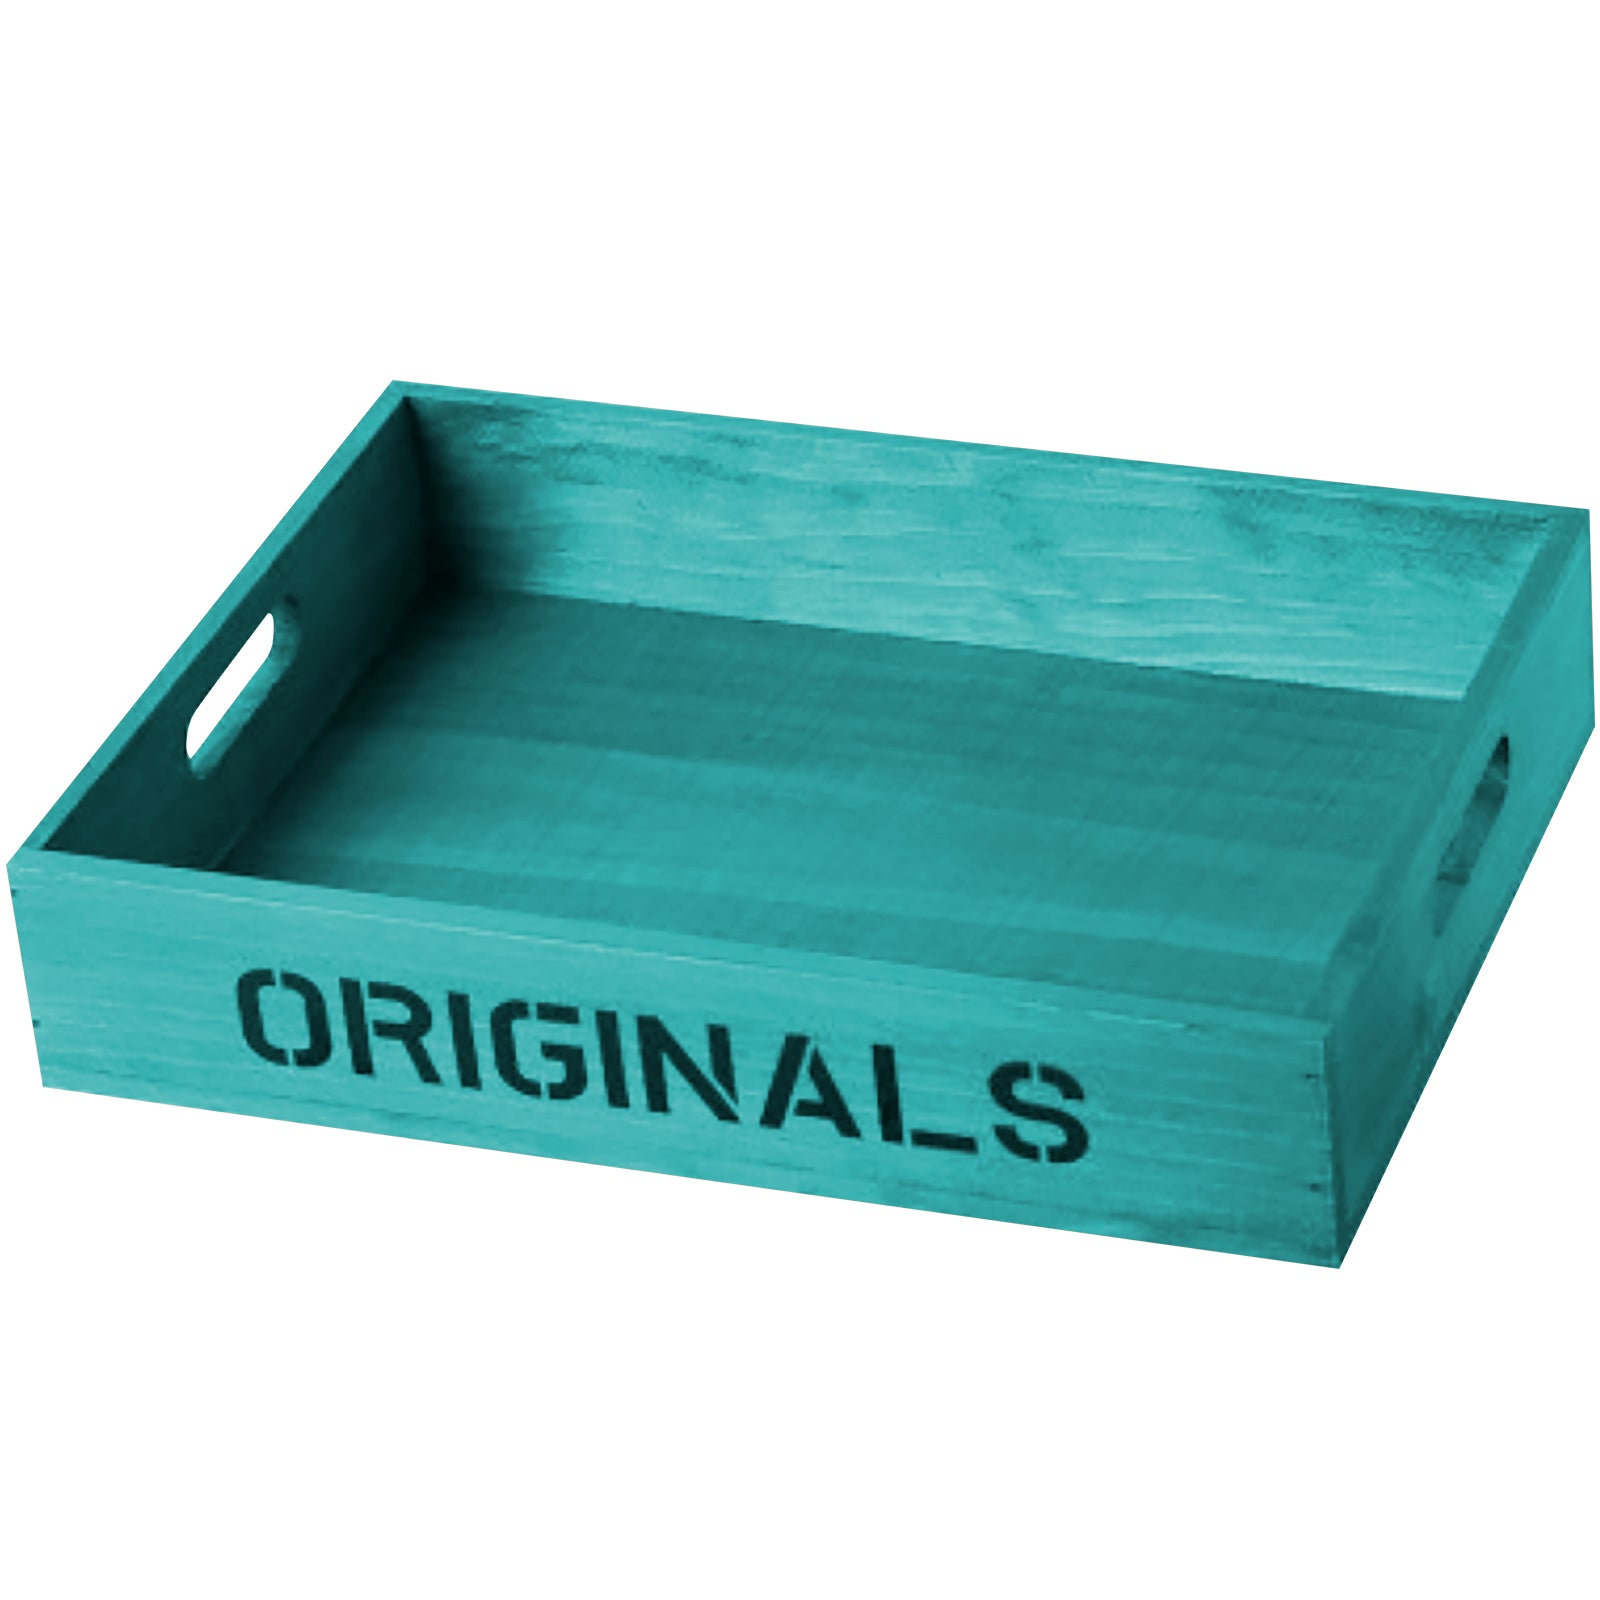 Load image into Gallery viewer, Multipurpose Teal Wooden Tray - Vintage Wood Home Organization Tray - Platter Board for Organizing Table